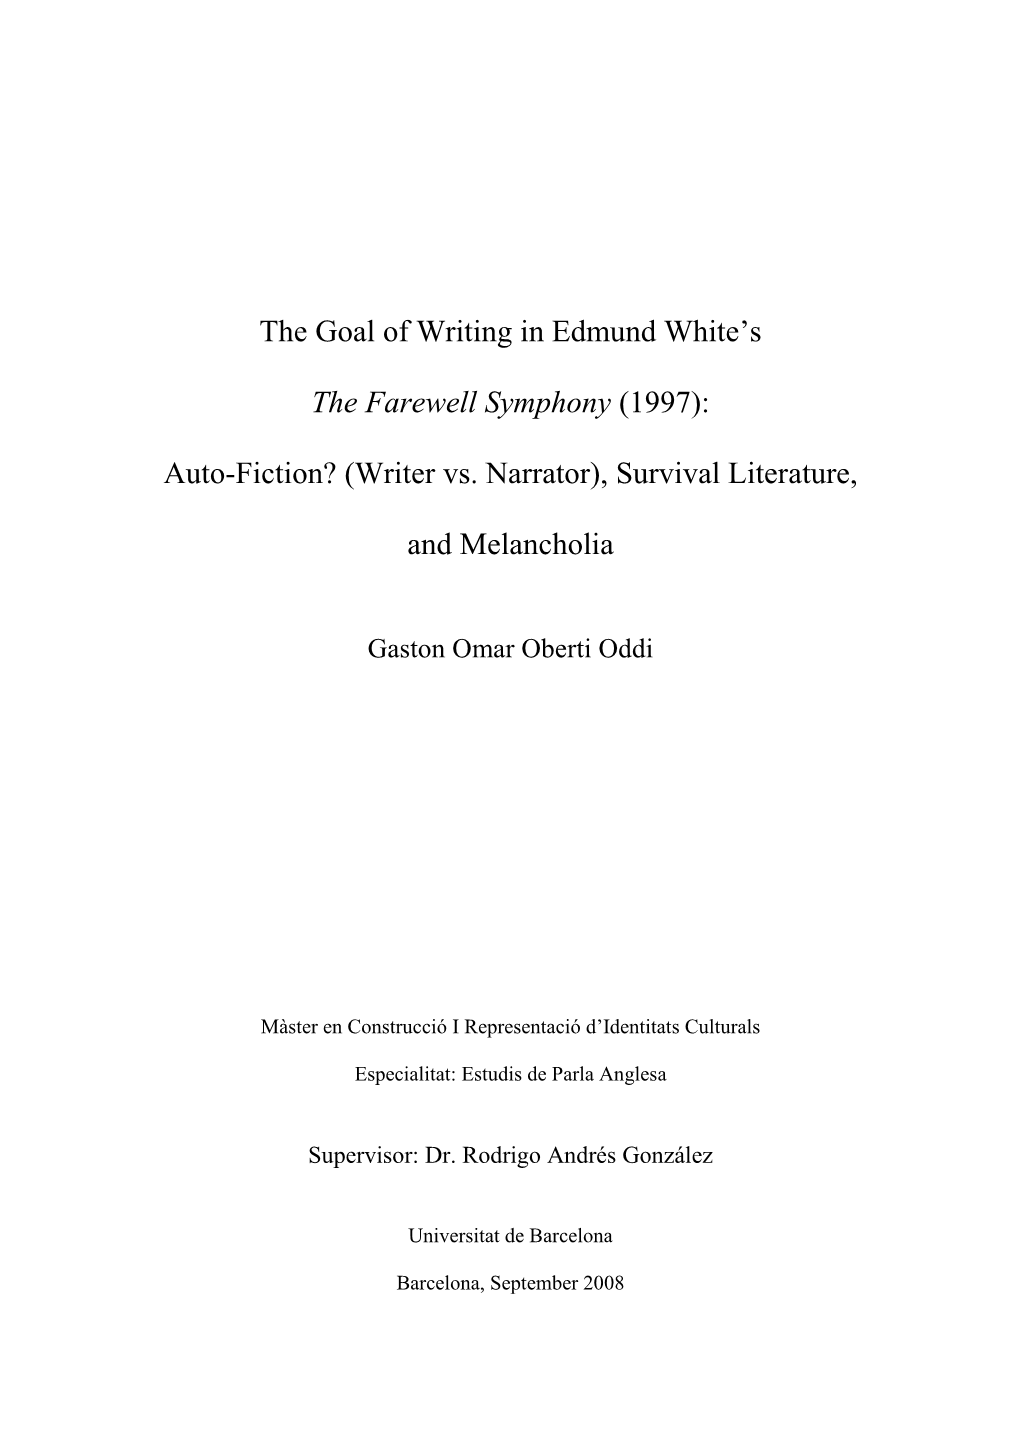 The Goal of Writing in Edmund White's the Farewell Symphony (1997)